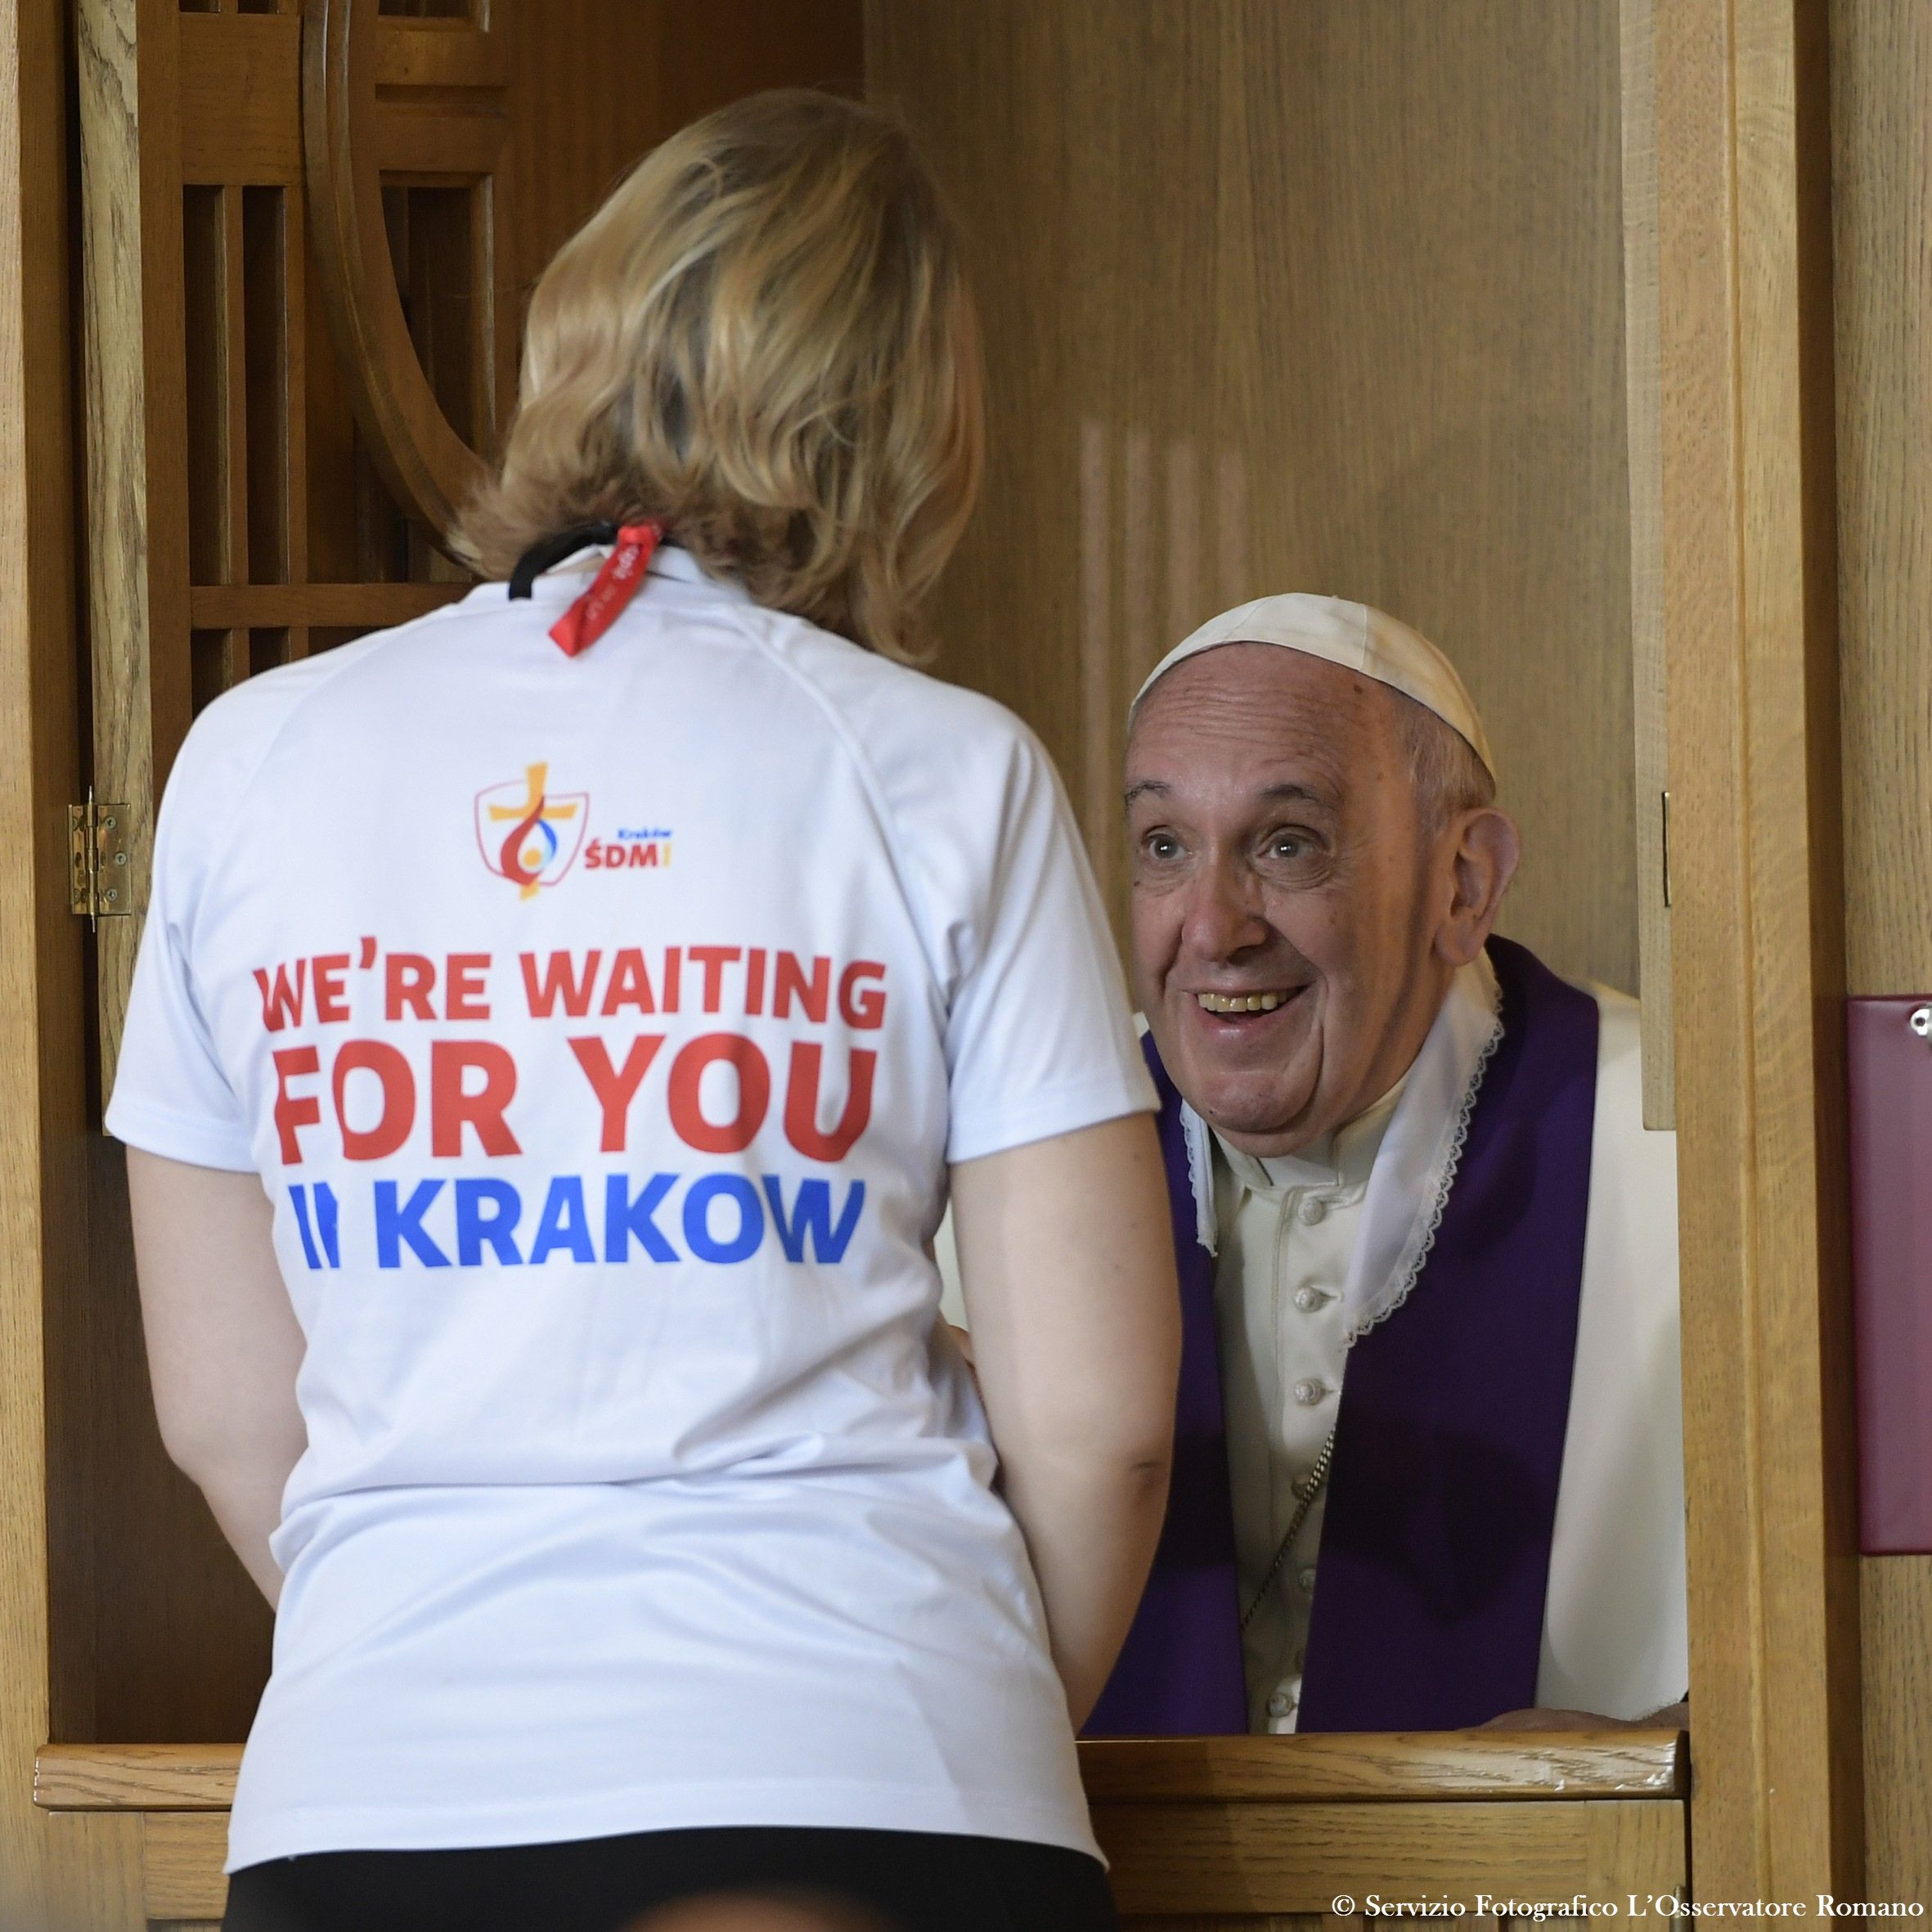 This handout released by Osservatore Romano shows Pope Francis confesseing a youth at the Divine Mercy Sanctuary on July 30, 2016 in Krakow-Lagiewniki as part of the World Youth Days (WYD). Pope Francis is in Poland for an international Catholic youth festival with a mission to encourage openness to migrants. HO / OSSERVATORE ROMANO / AFP